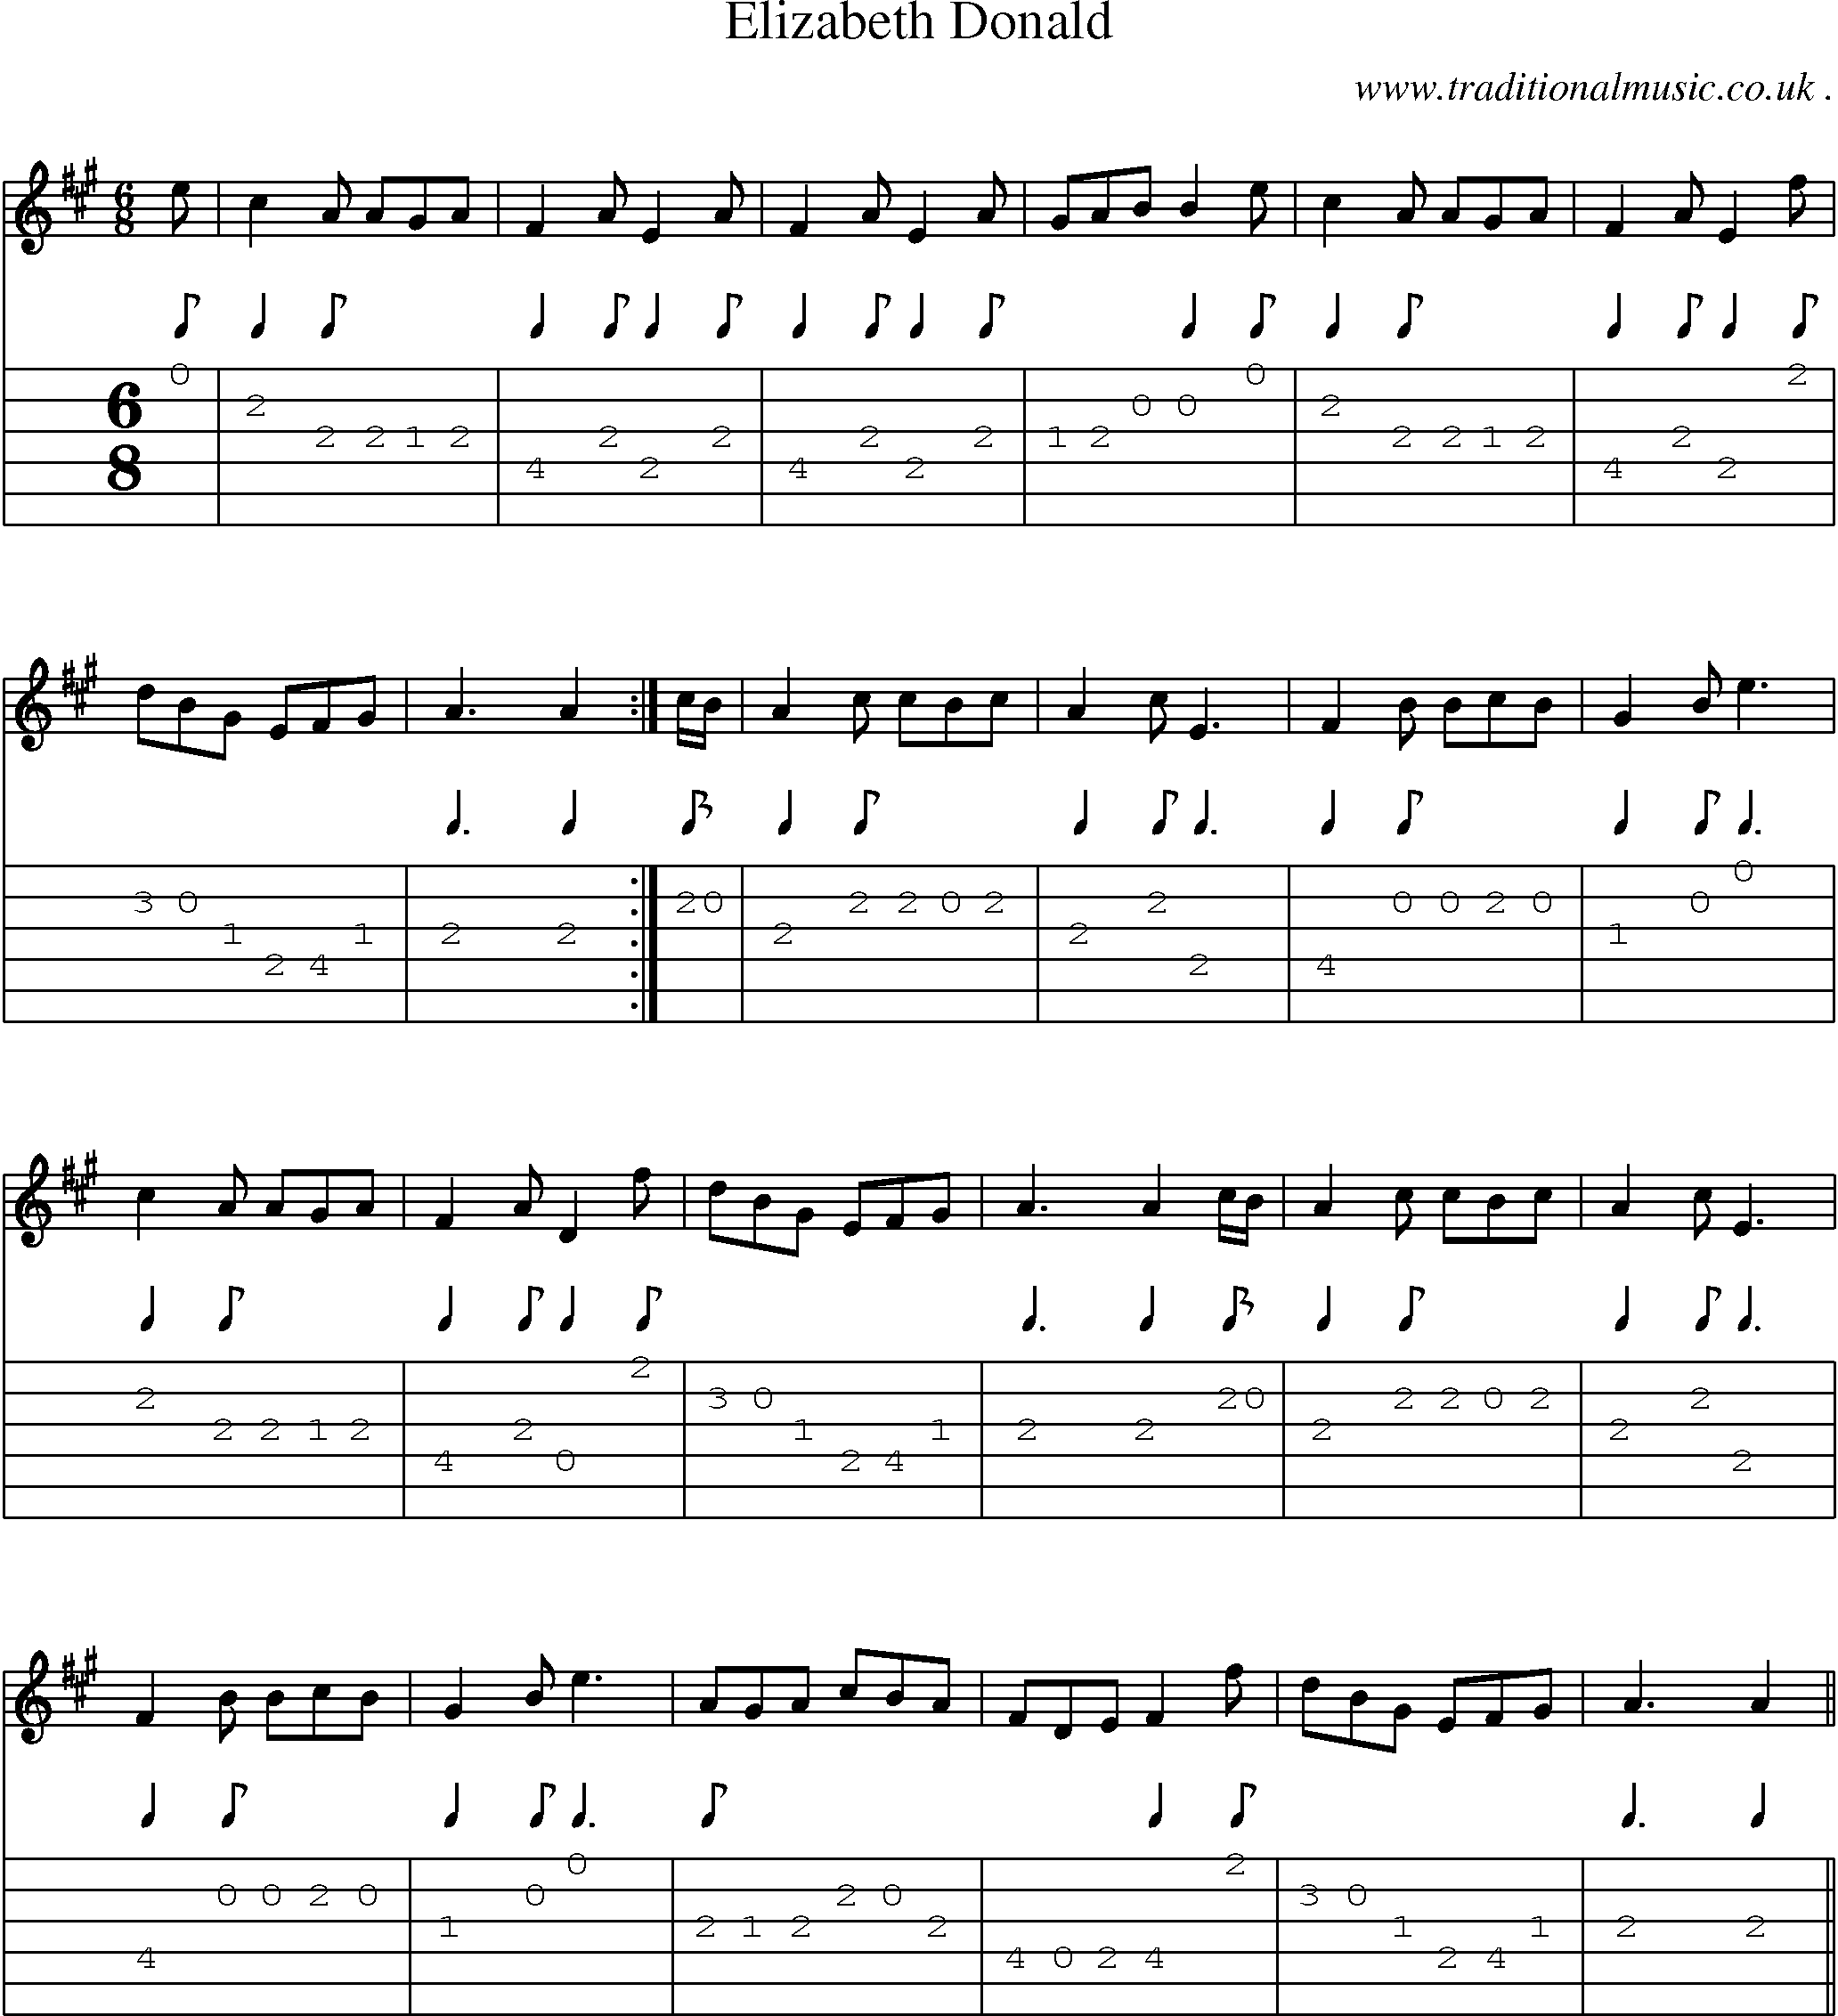 Sheet-Music and Guitar Tabs for Elizabeth Donald